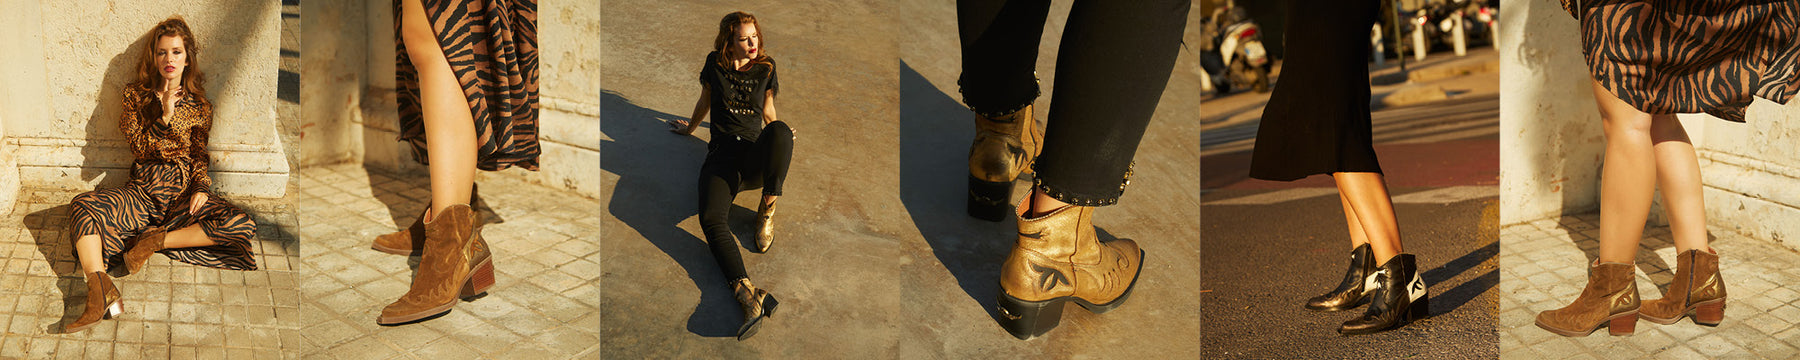 Woman » Shoes » Boots